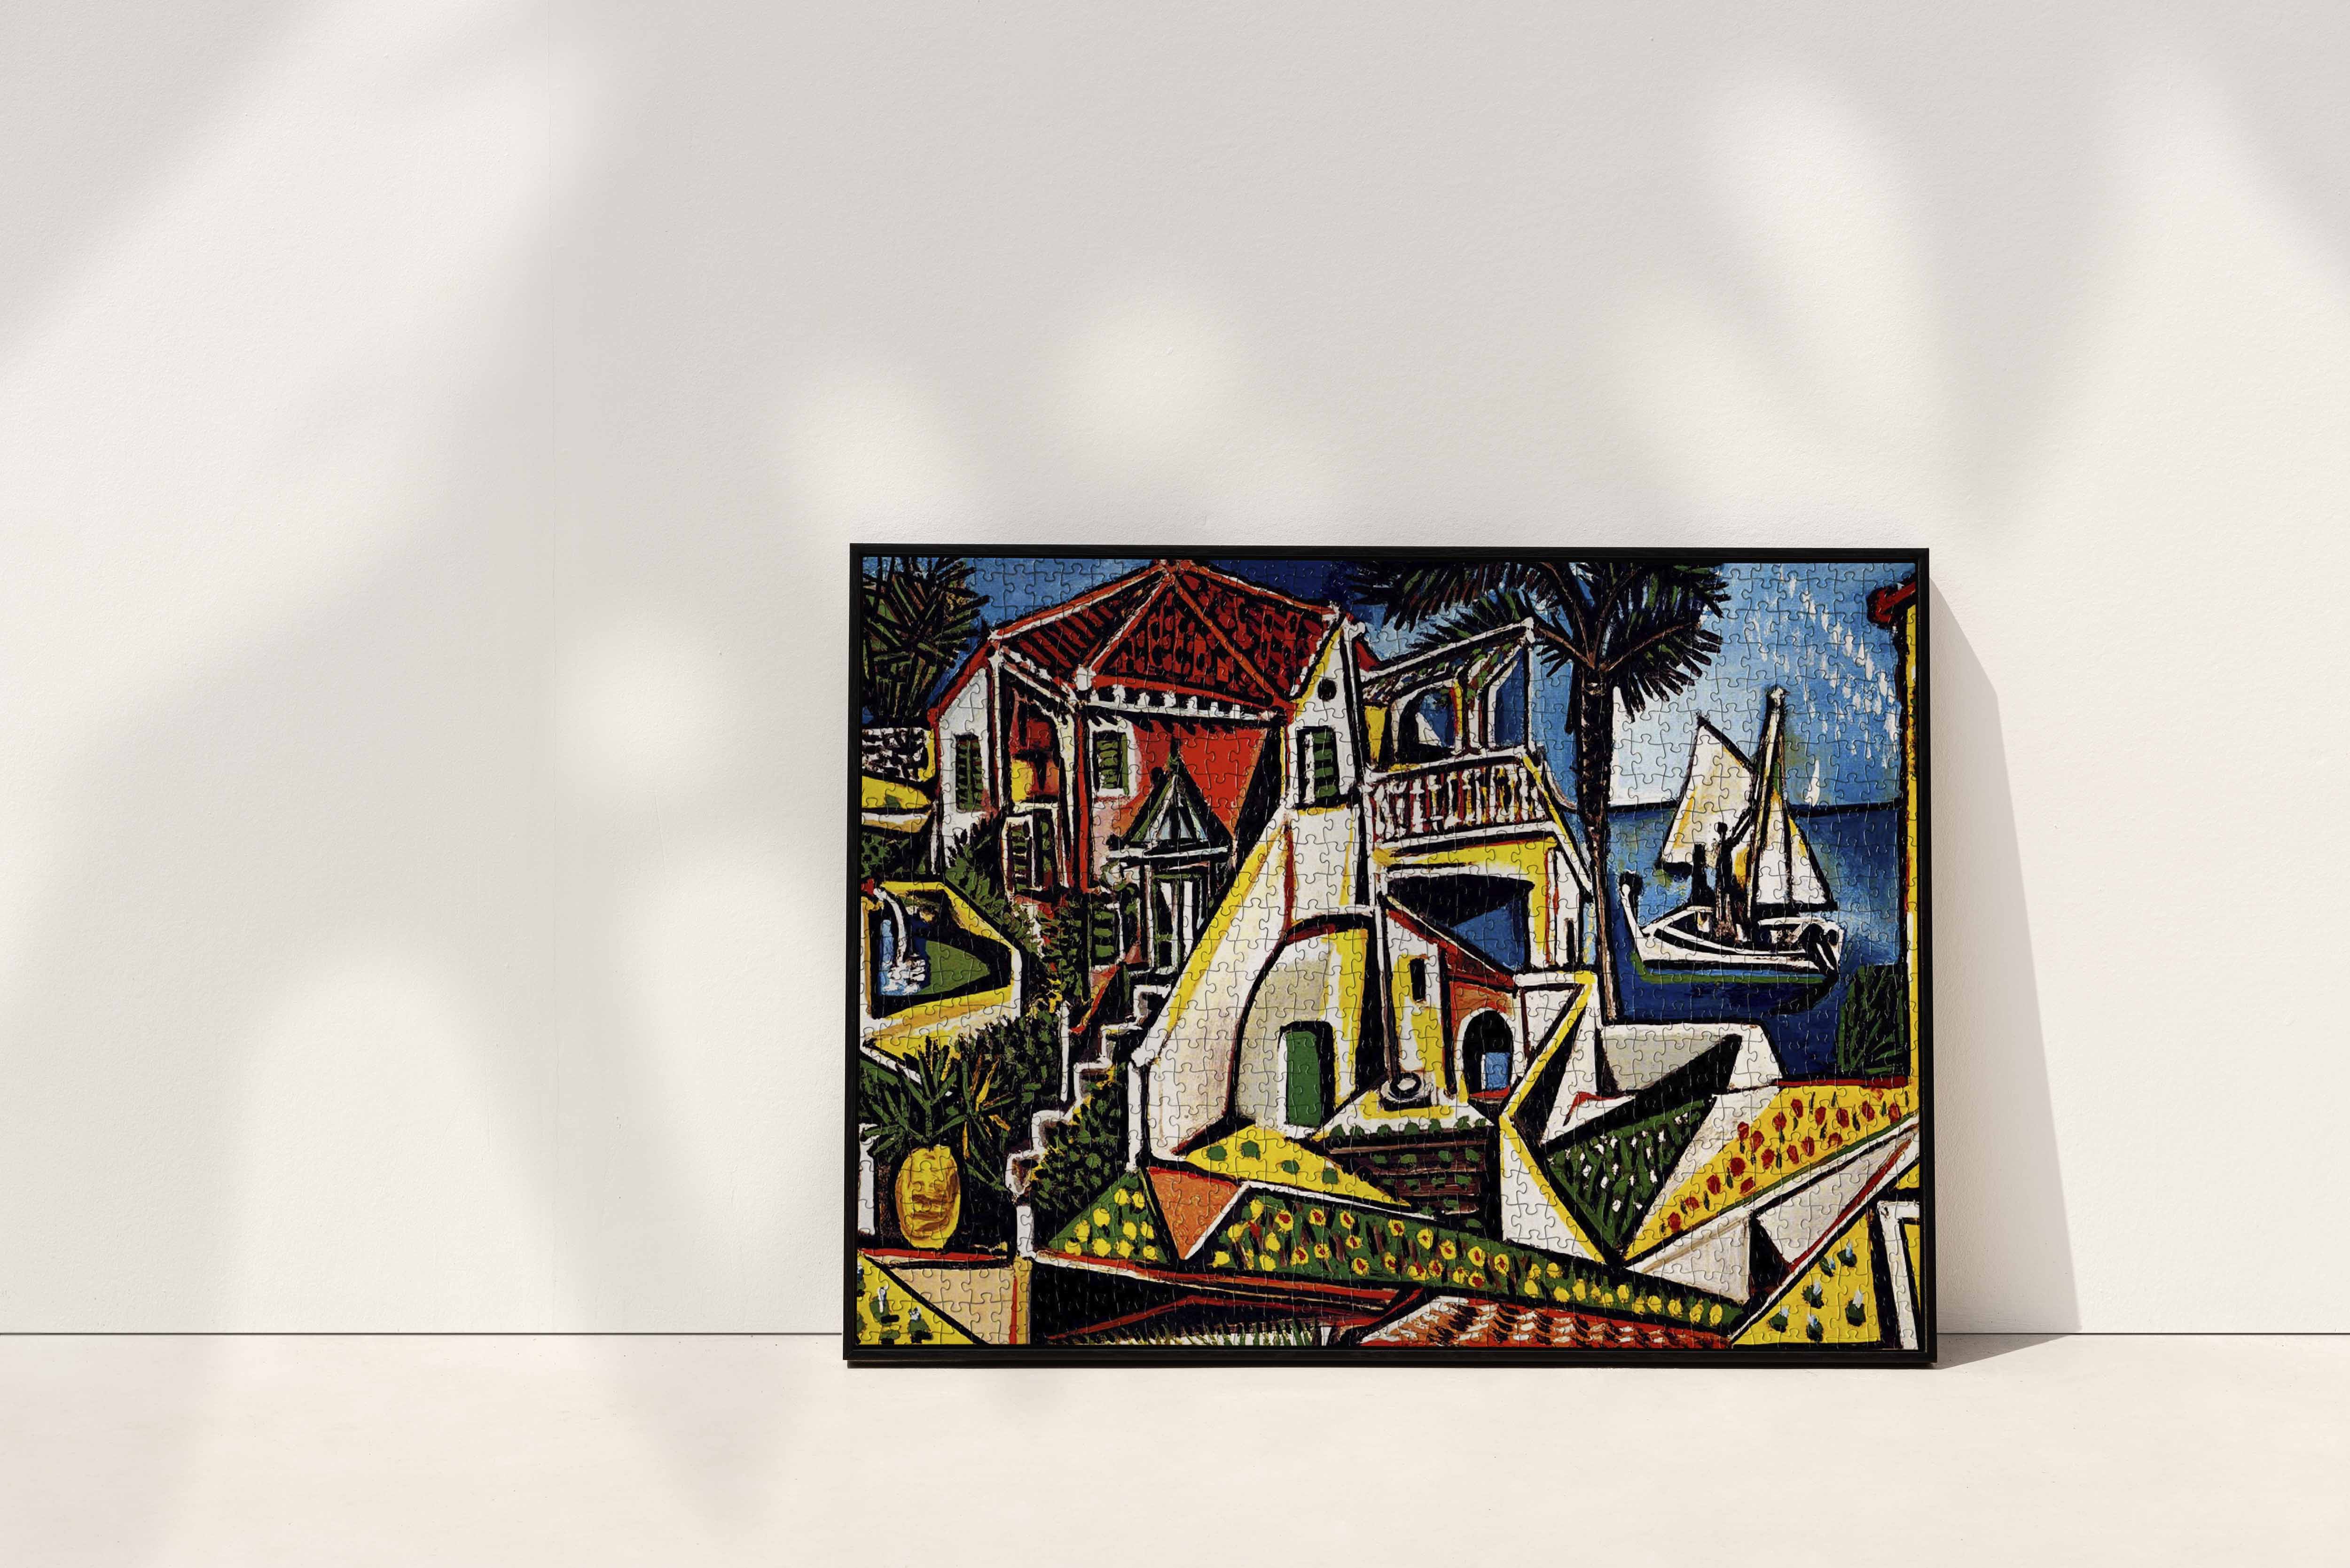 A visually stunning jigsaw puzzle featuring Picasso's Mediterranean Landscape, challenging puzzle enthusiasts with its intricate design and rich color palette.